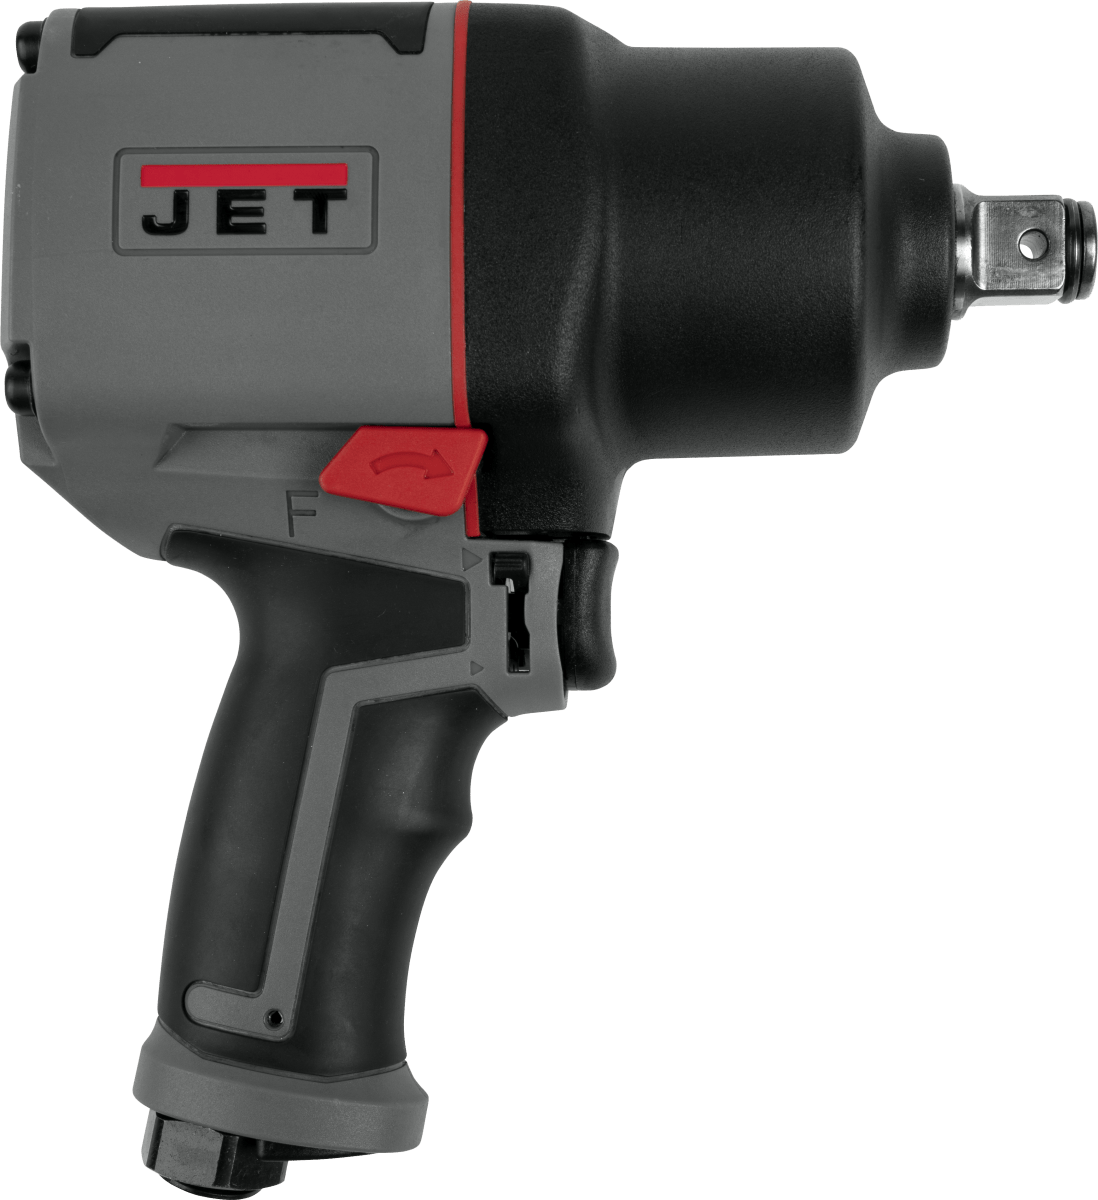 4" Composite Impact Wrench - Jet